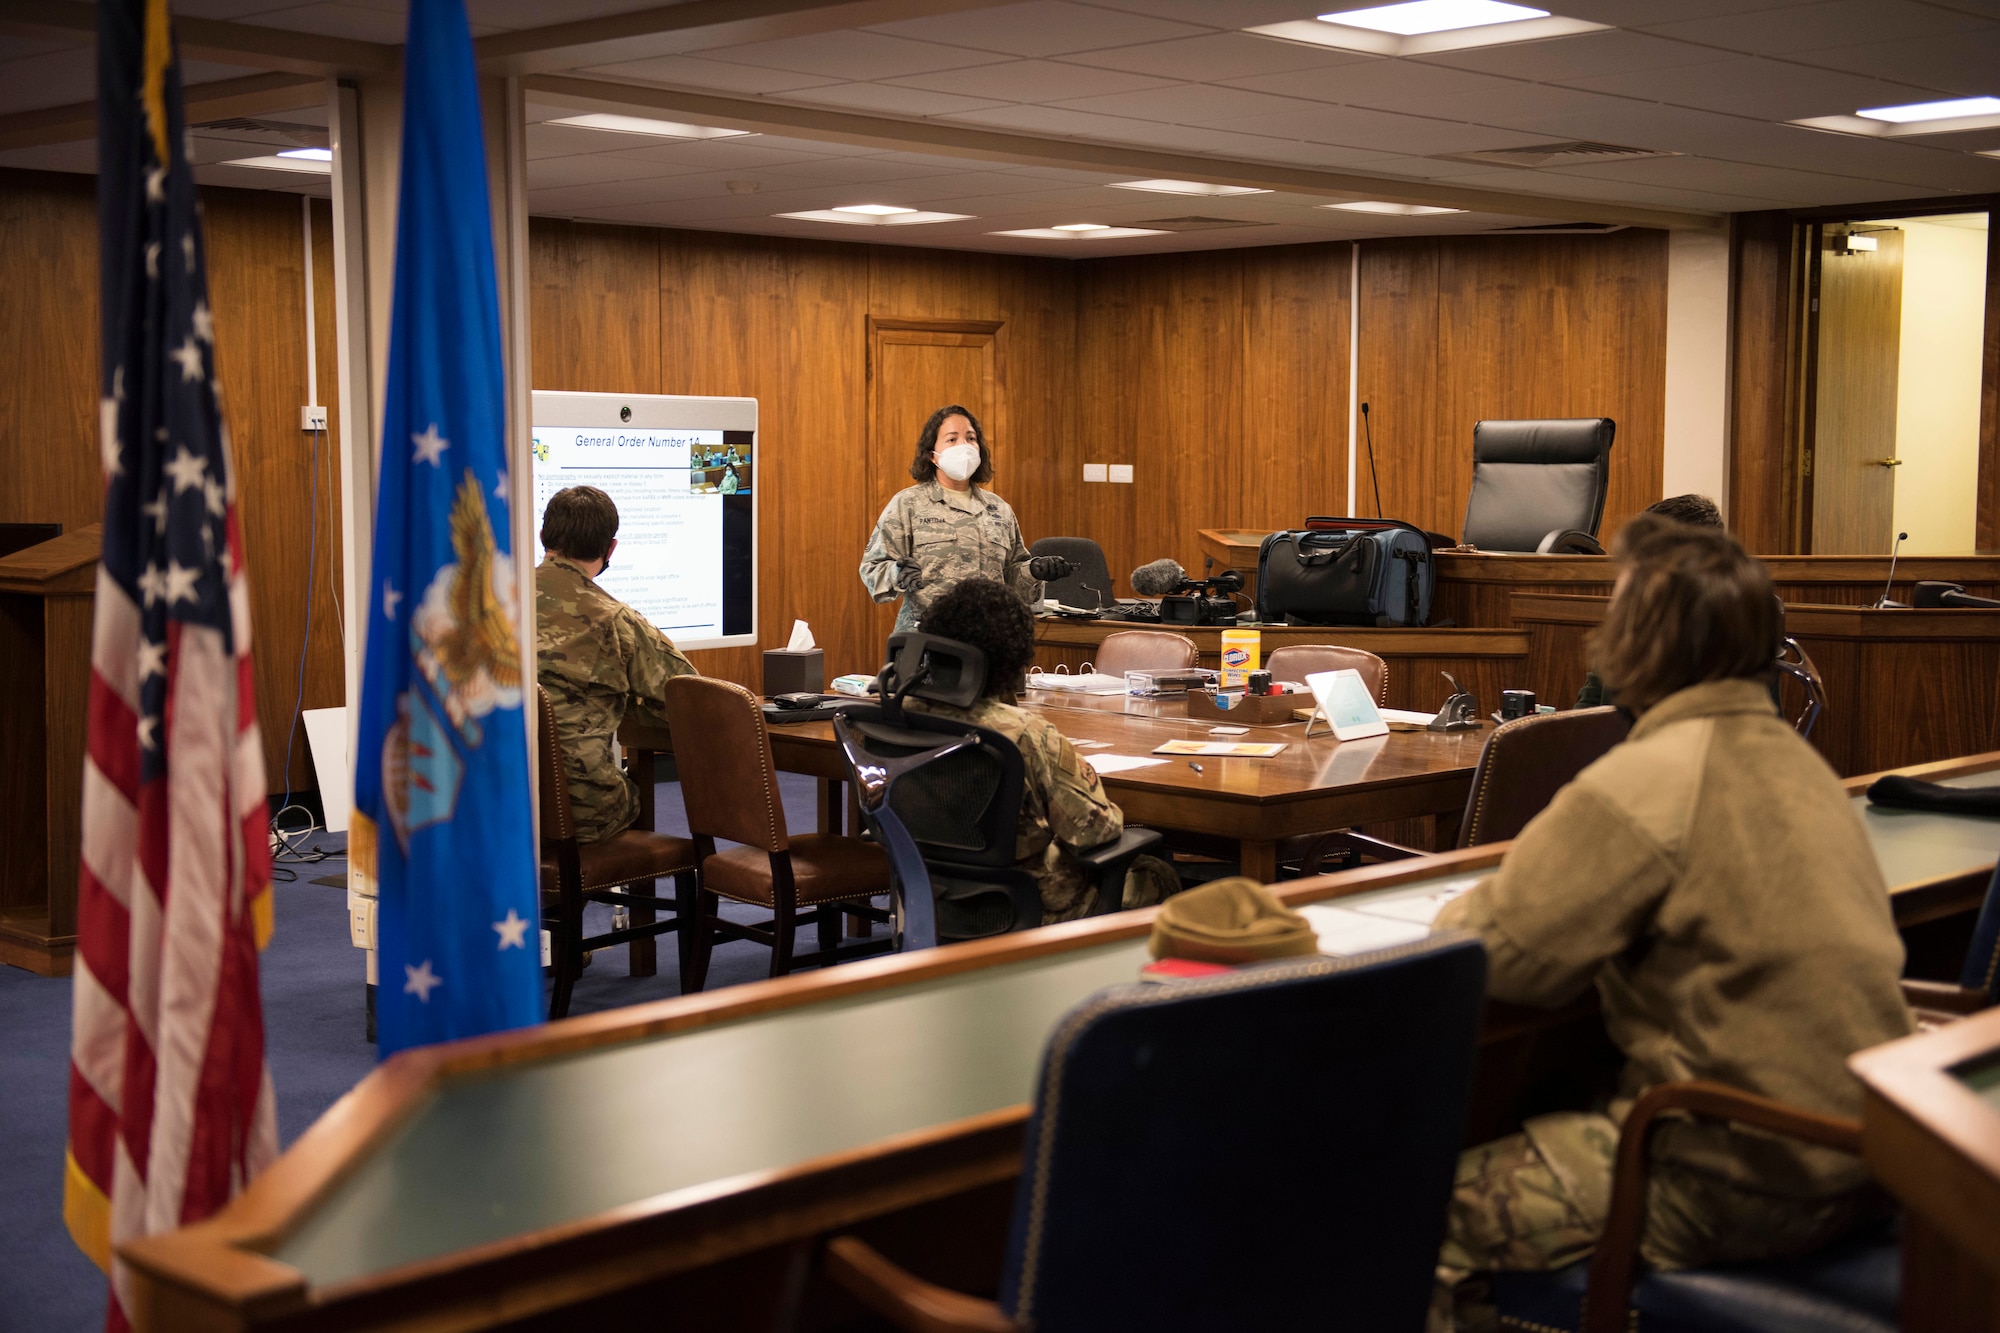 U.S. Air Force Master Sgt. Miriam Pantoja, 501st CSW Judge Advocate Office, NCOIC of general law, conducts a deployment brief June 2, 2020, at RAF Alconbury, England. The 501st Combat Support Wing legal office hosted a deployment brief and will execution ceremony for all Security Forces deploying in the next 60 days. (U.S. Air Force photo by Airman 1st Class Jennifer Zima)